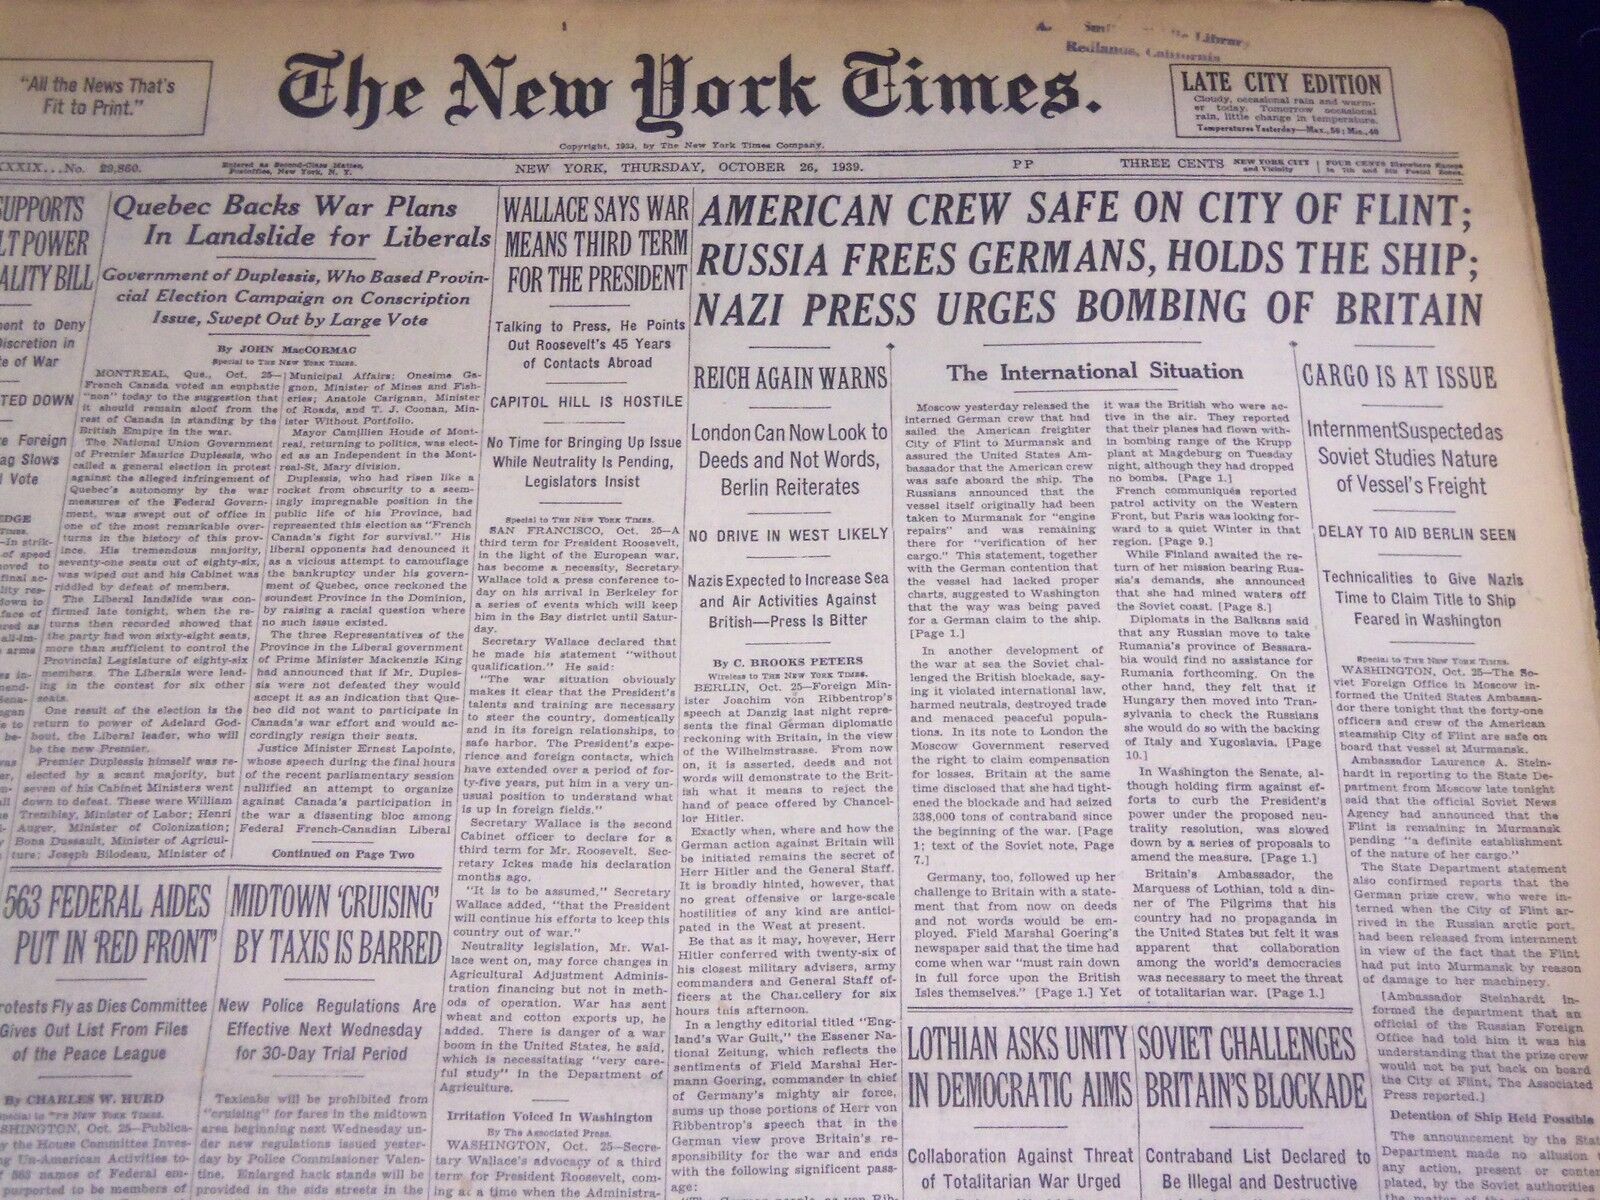 1939 OCTOBER 26 NEW YORK TIMES - BOMBING OF BRITAIN URGED - NT 3691